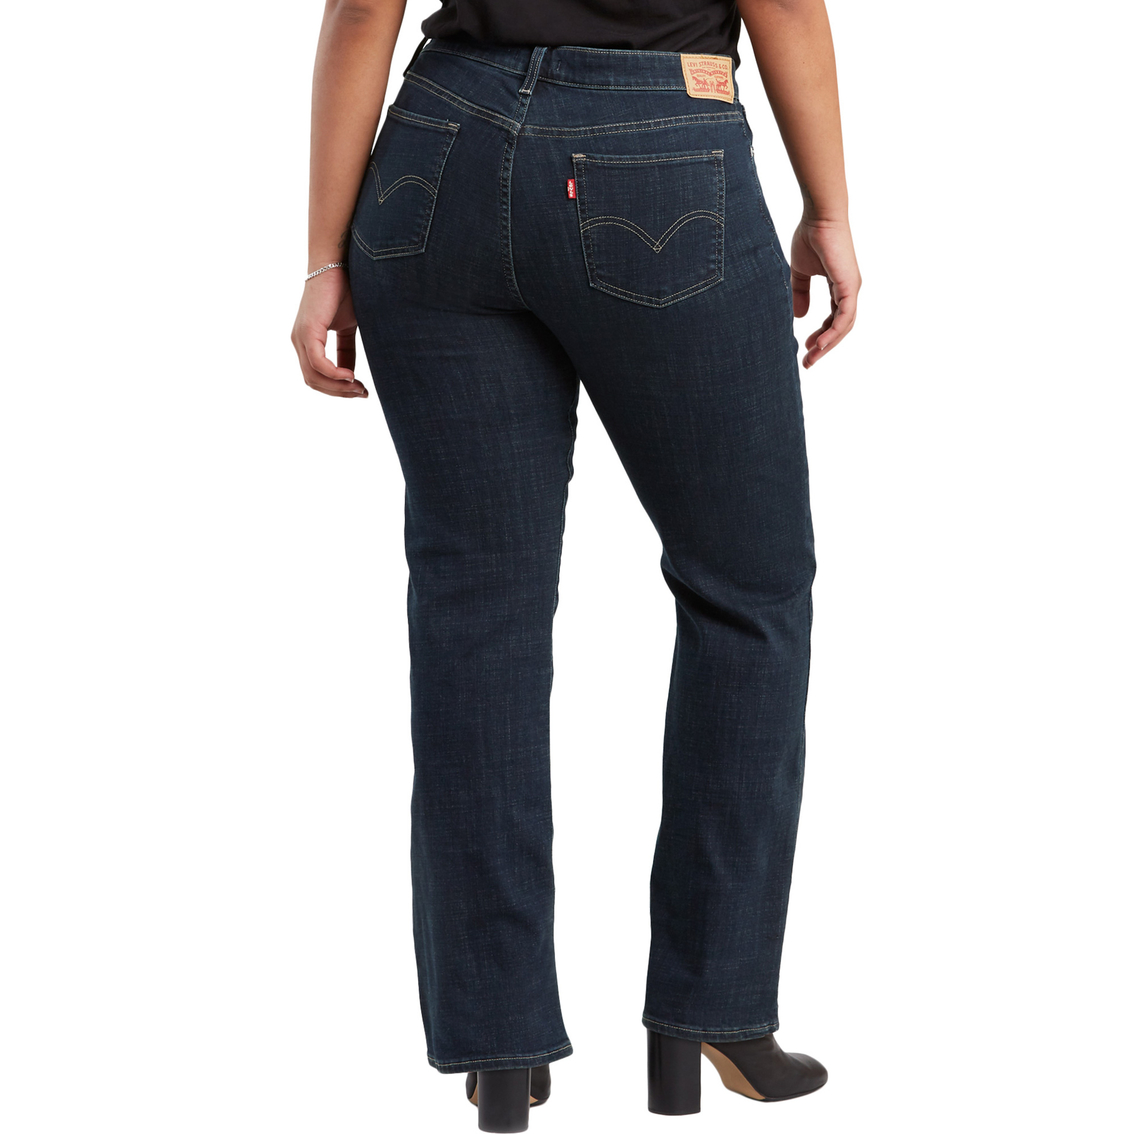 Levi's Plus Size Classic Boot Jeans - Image 2 of 3